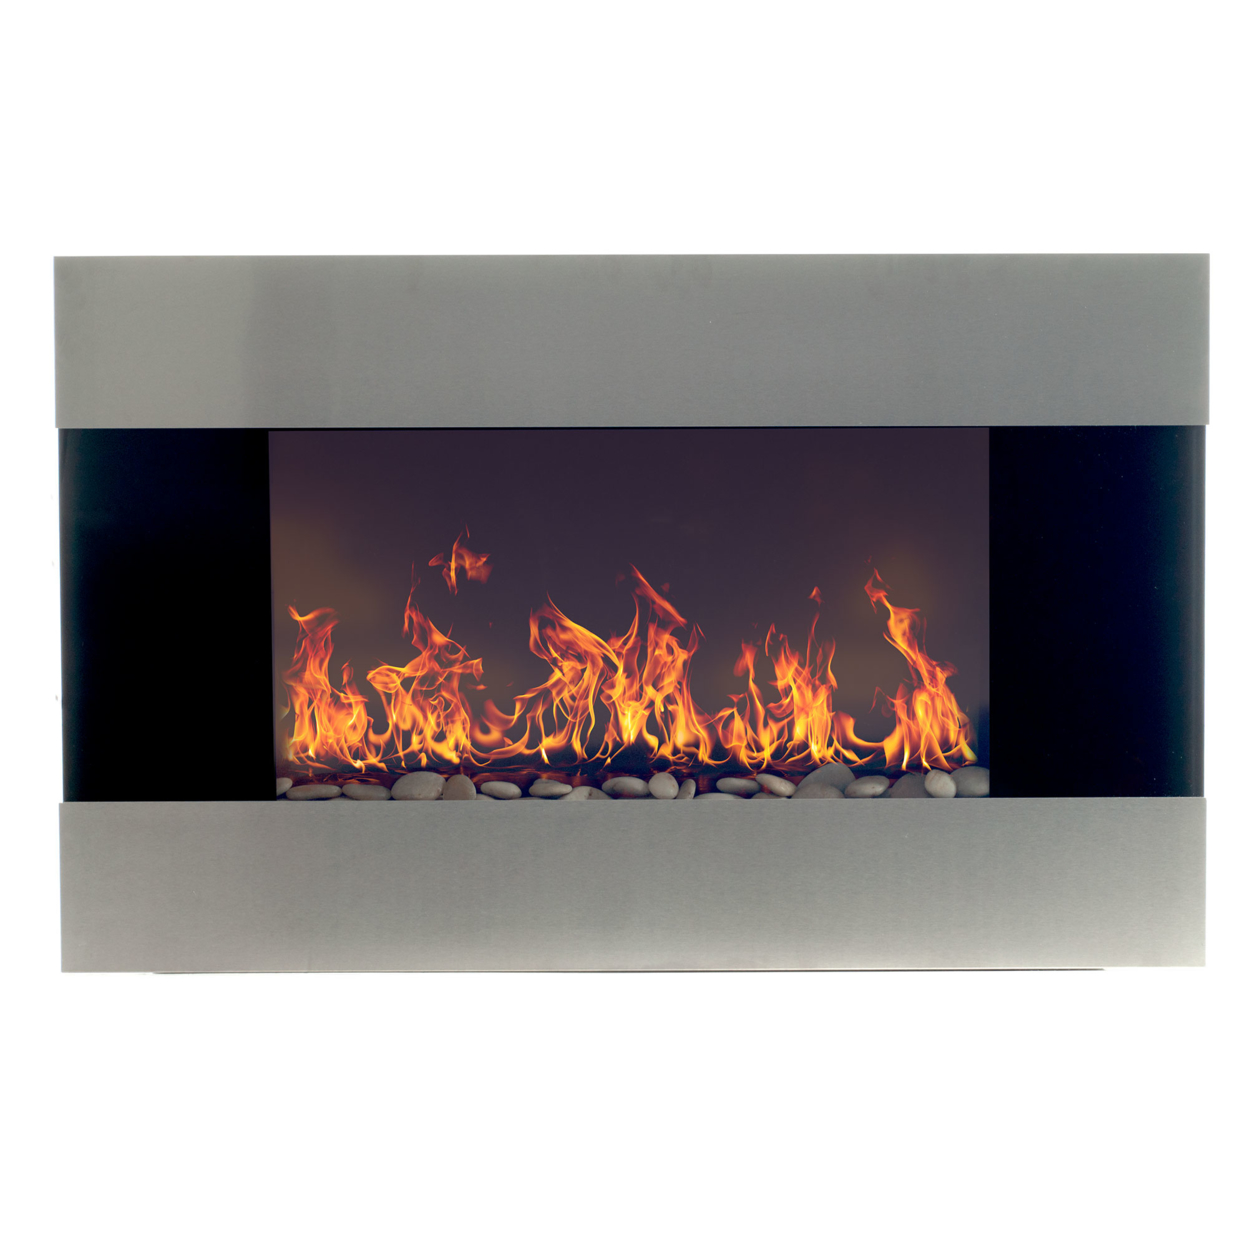 Northwest Stainless Steel Electric Fireplace With Wall Mount & Remote